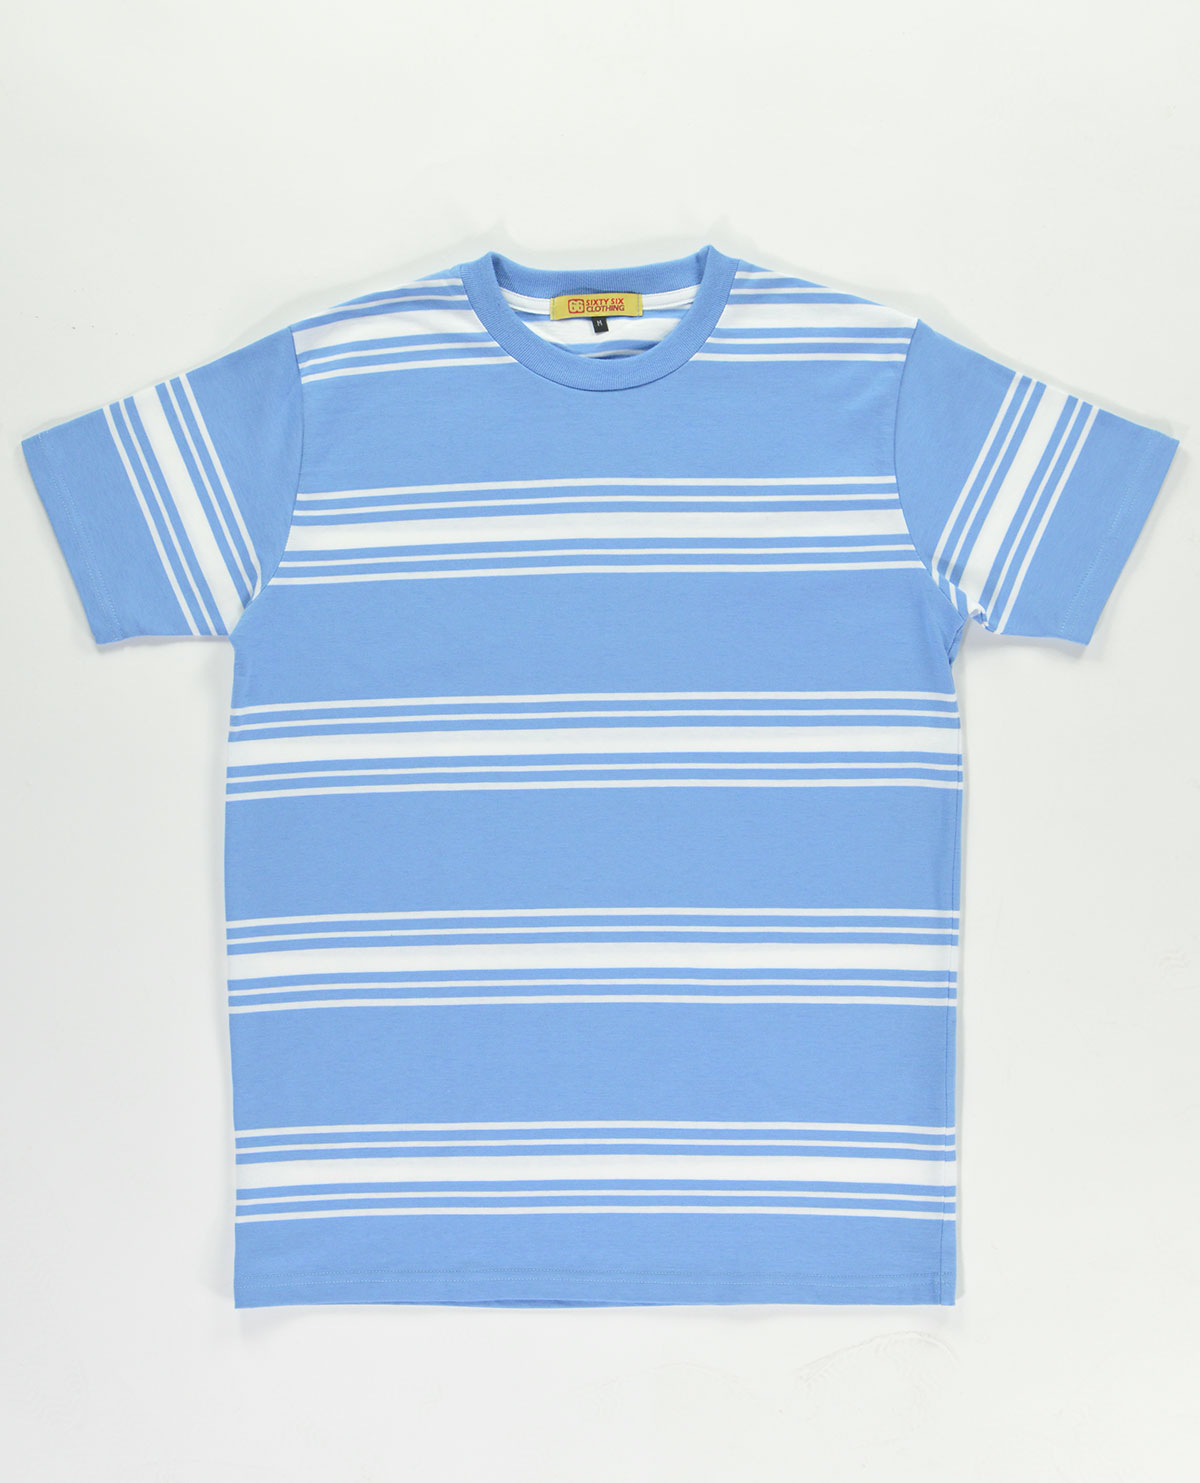 ‘On Campus’ T-Shirt – Sky Blue and White Stripe Surf Inspired By 66 ...